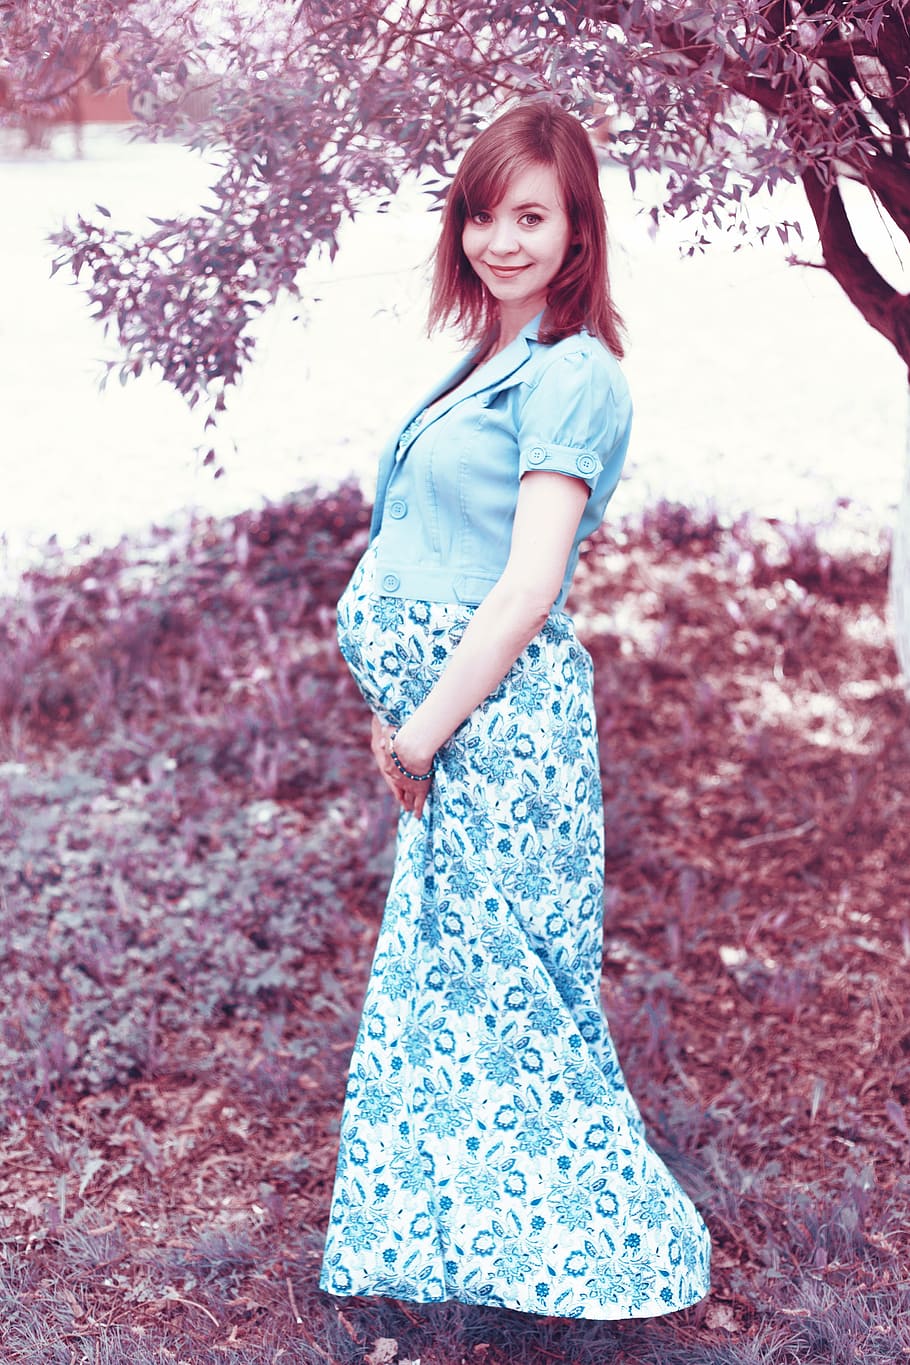 pregnant woman wearing blue floral dress standing near tree during daytime